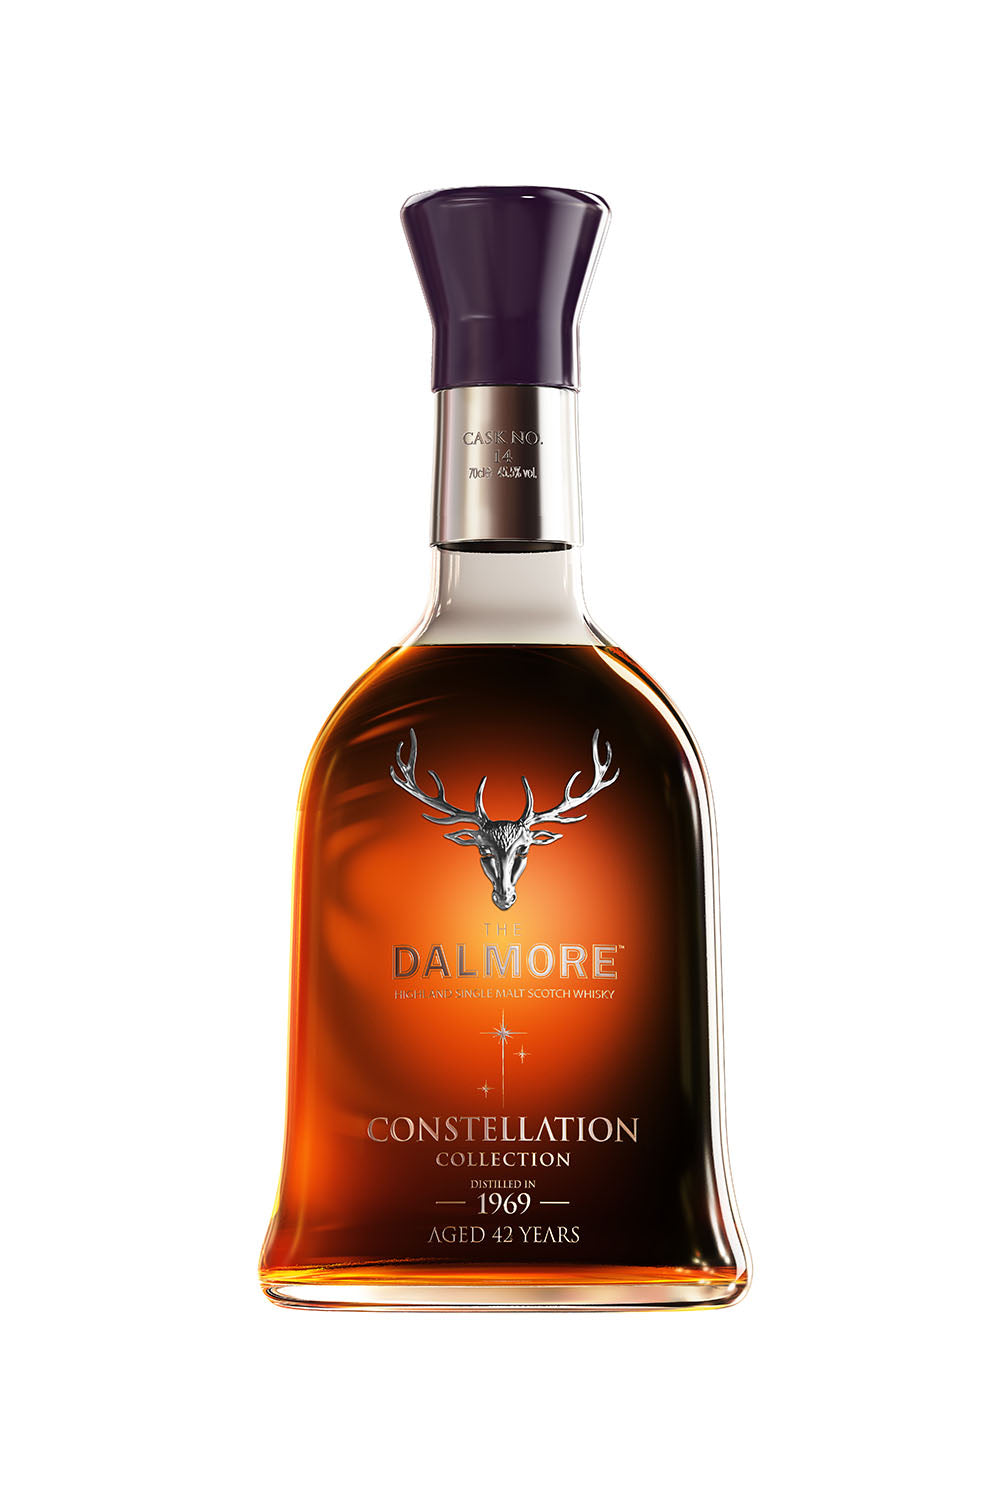 The Dalmore 1969 Constellation - Cask 14